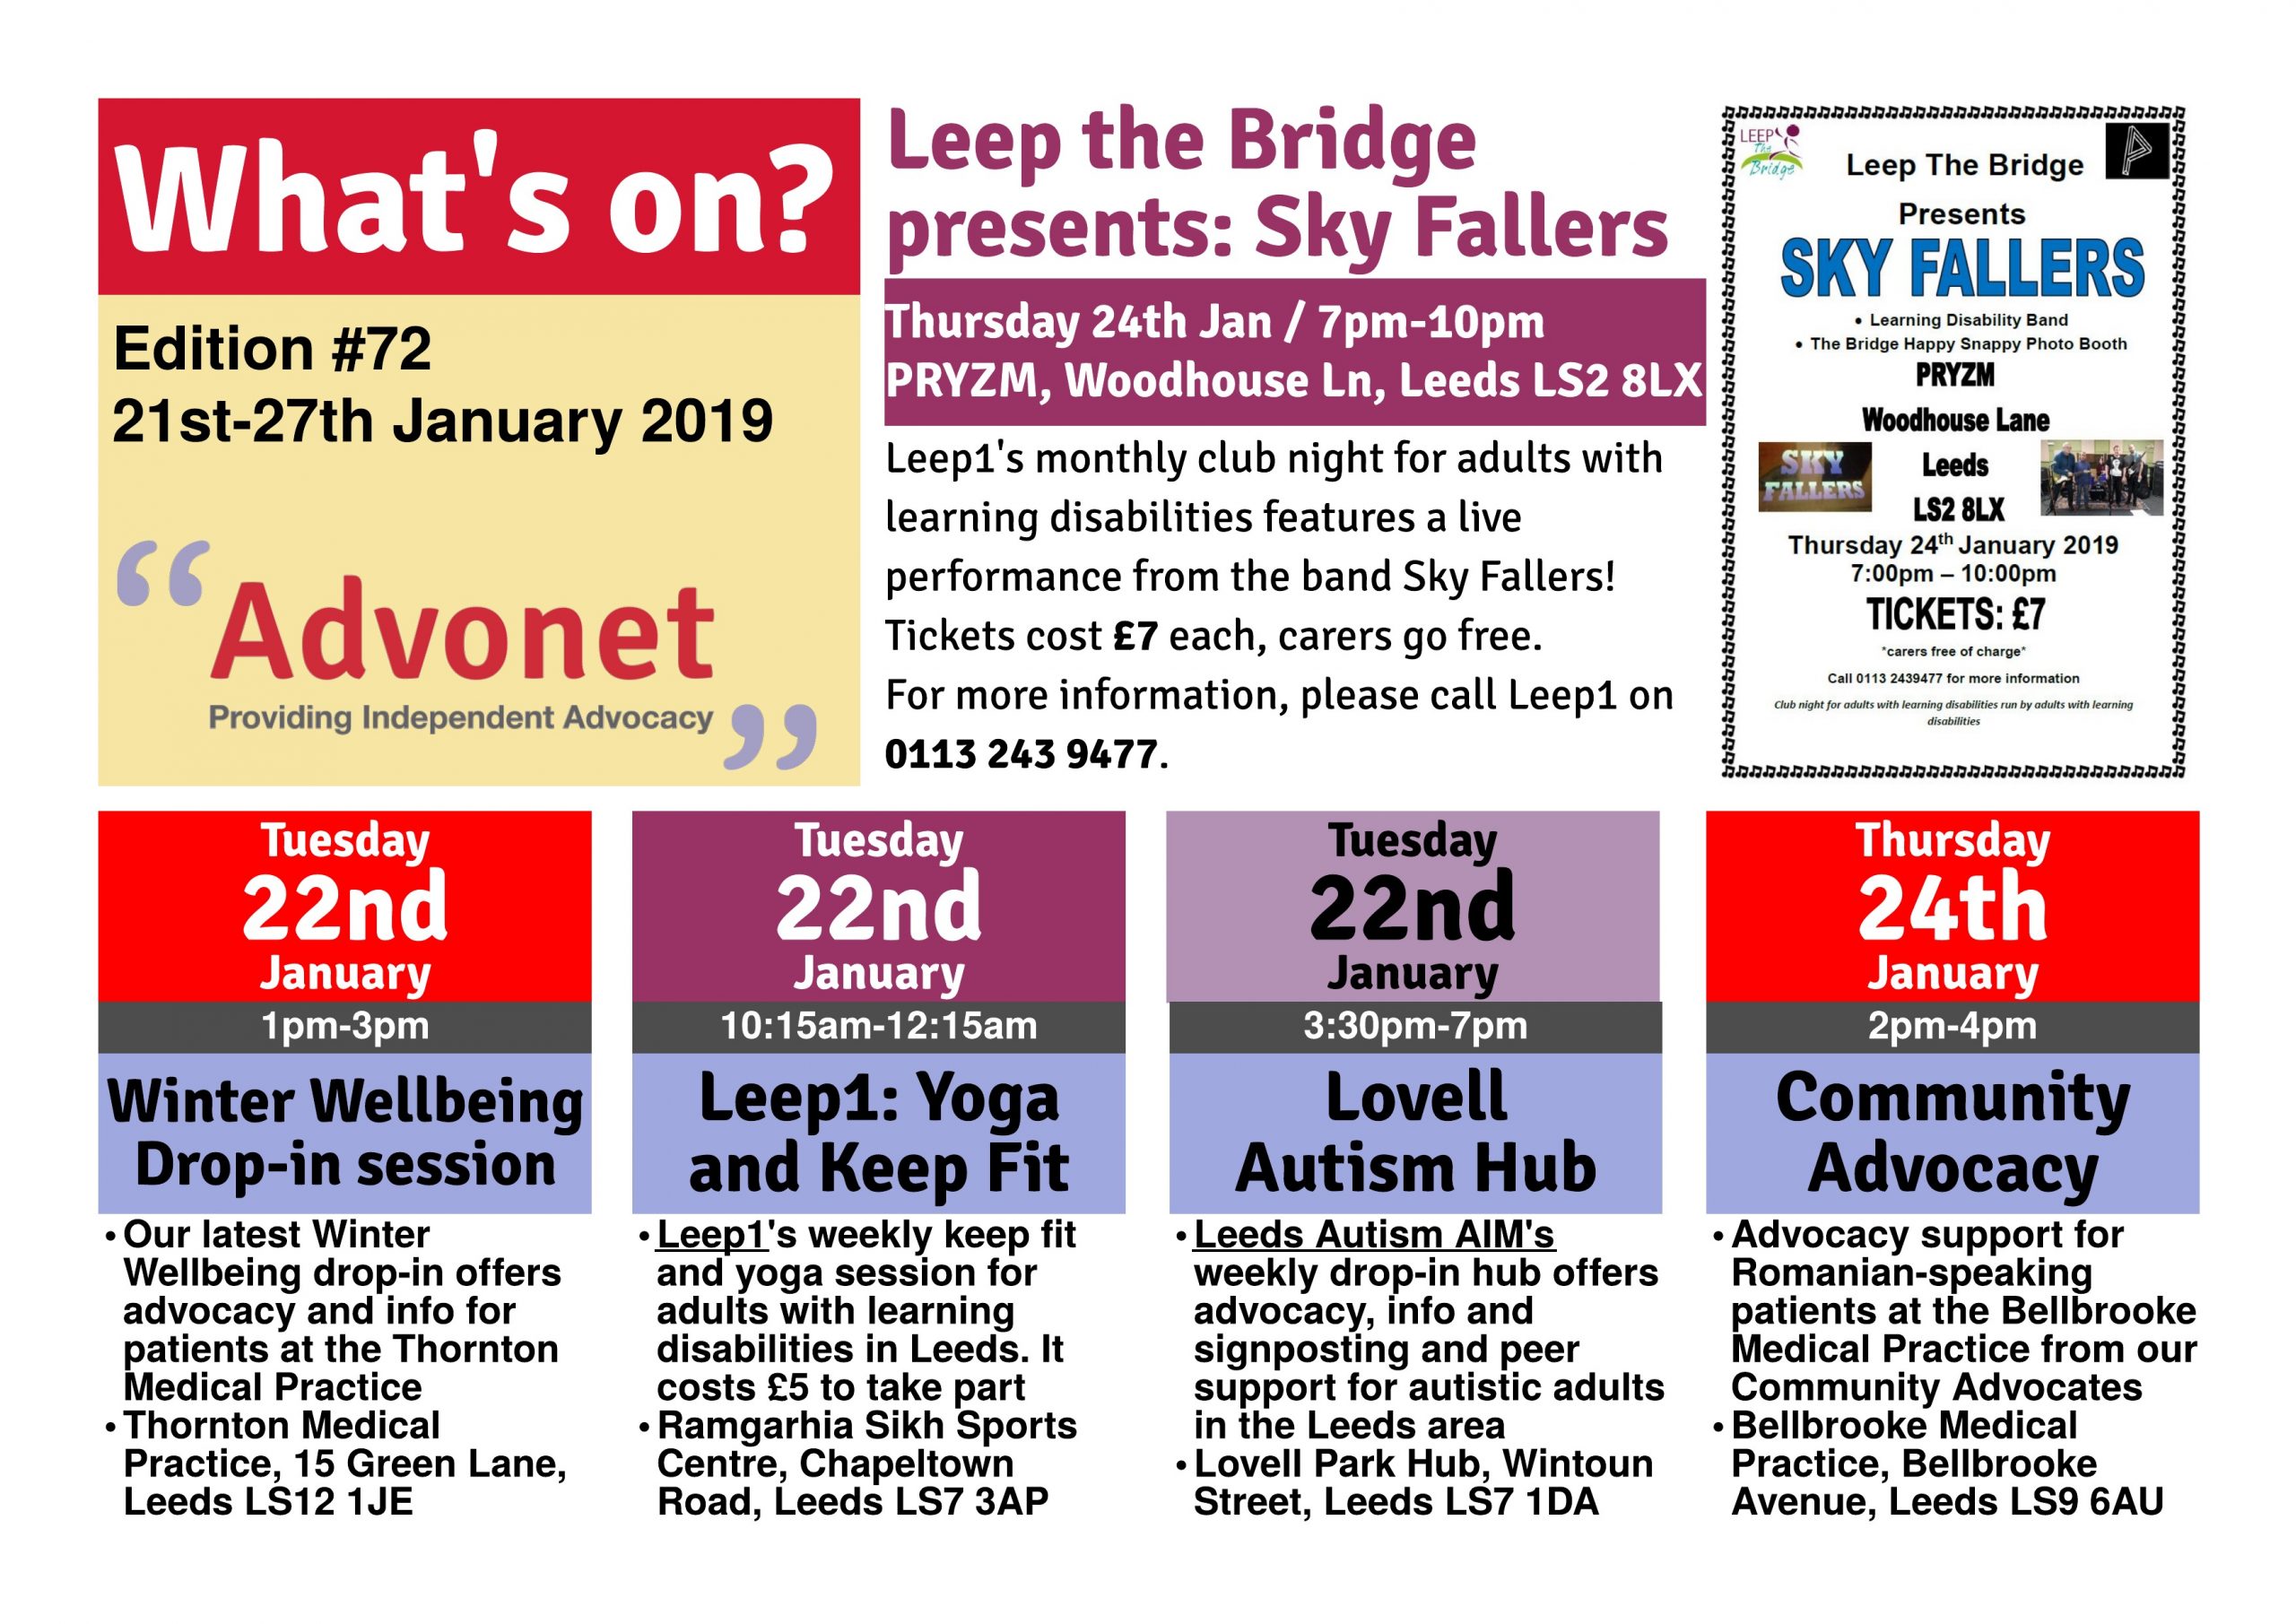 What's On - 21st-27th January 2019